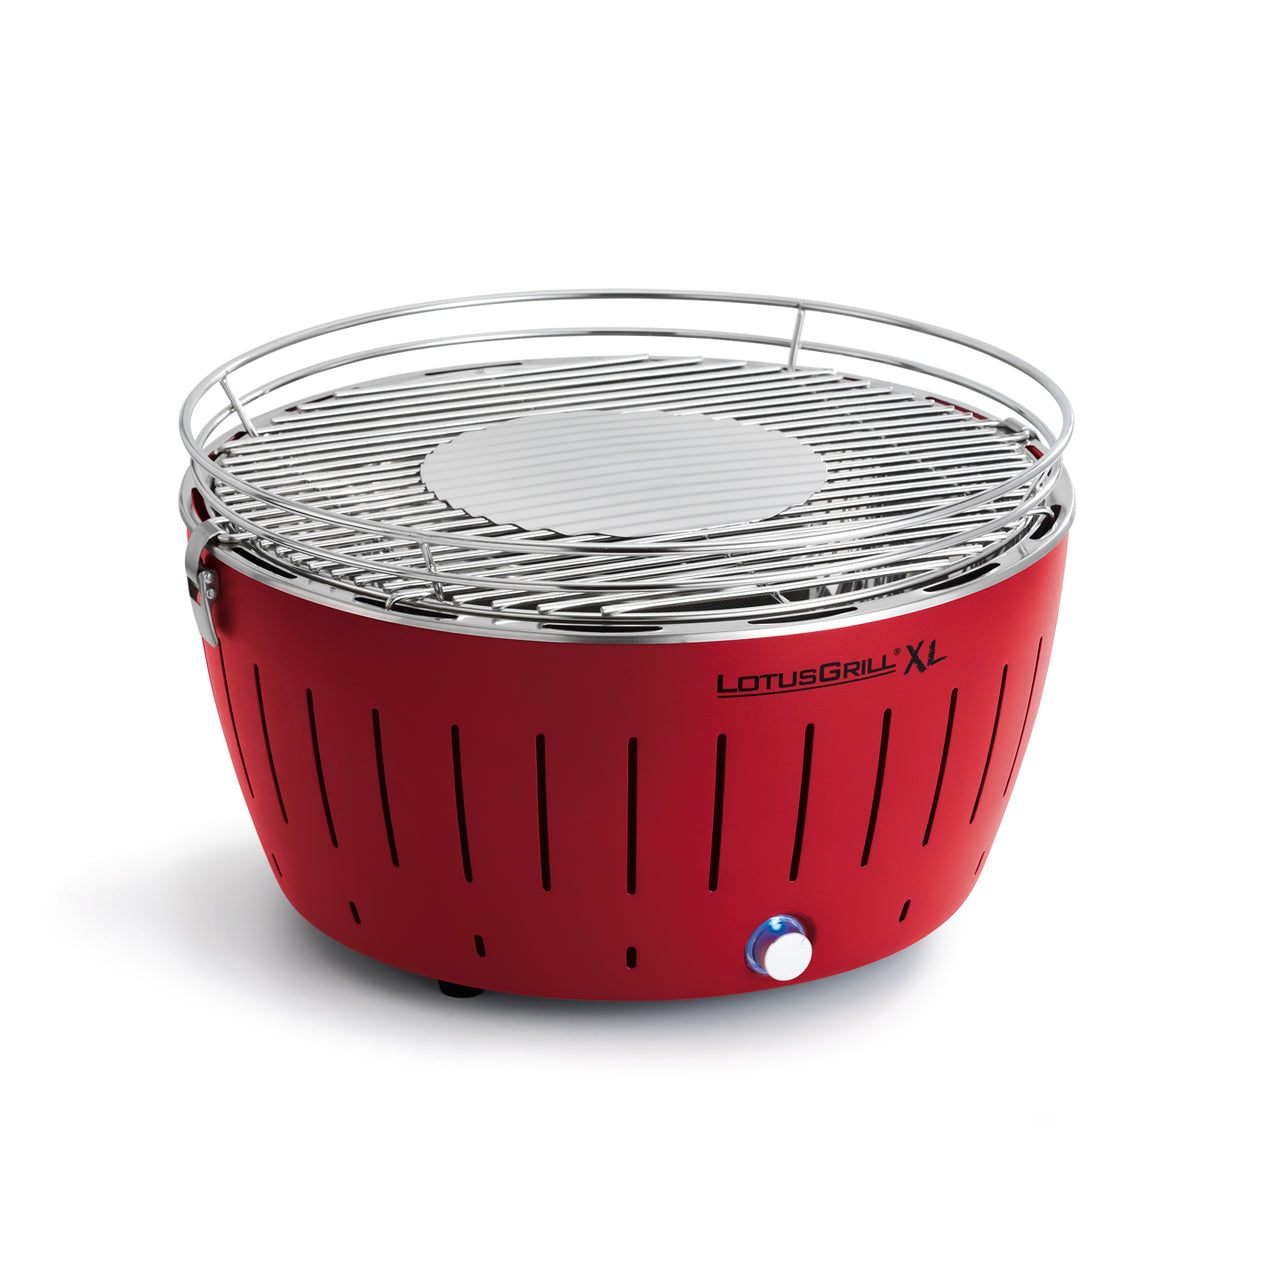 Lotus Grill BBQ Red